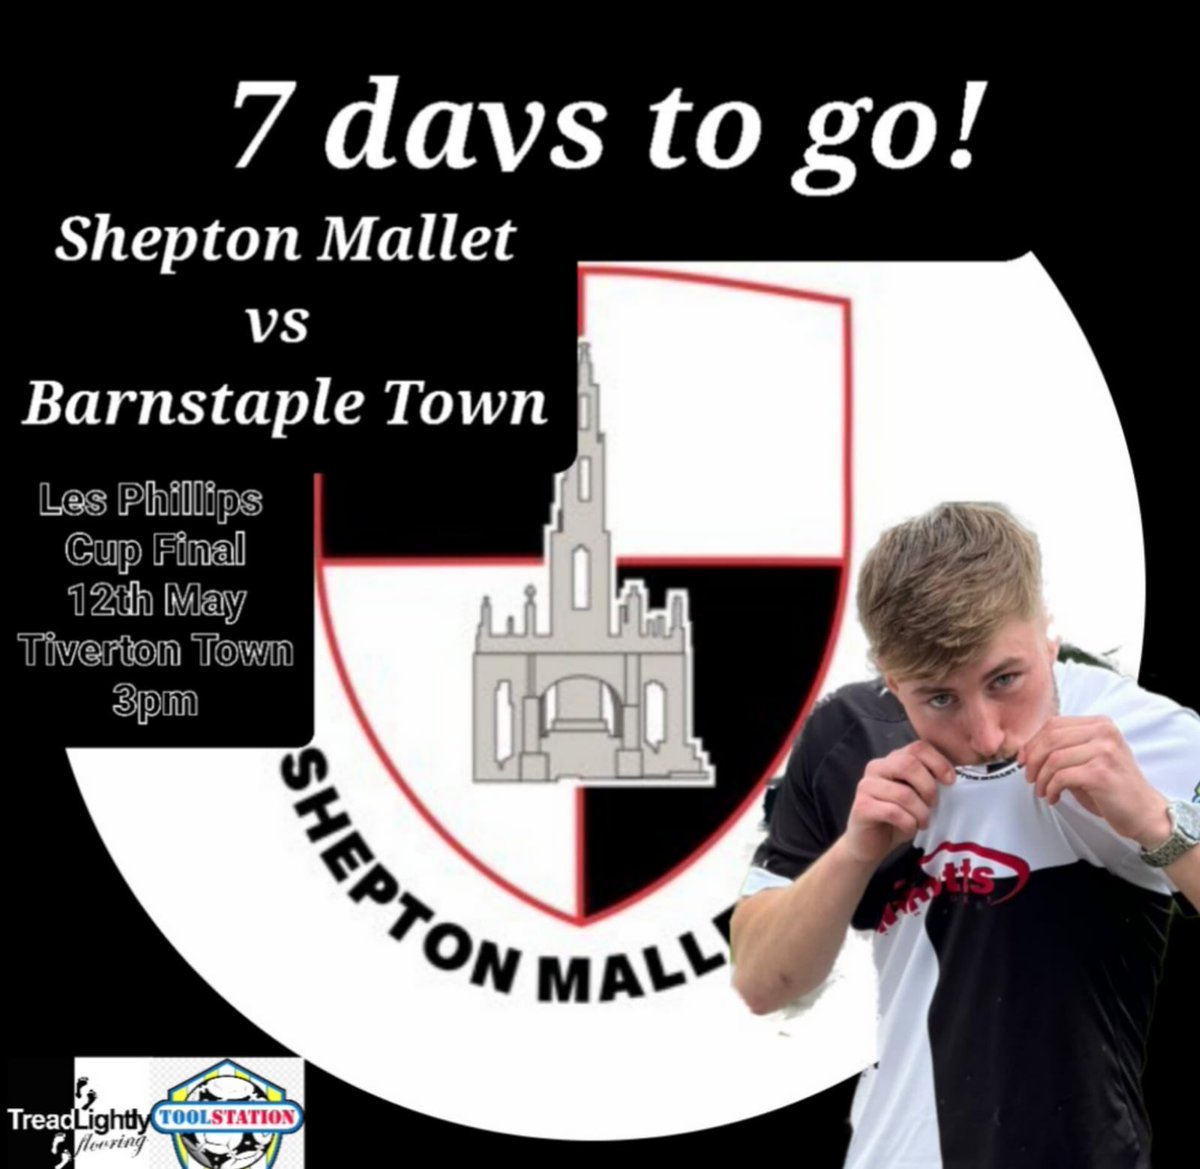 7 days to go Mallet fans👀 countdown is on🖤🤍 #towncalledmallet